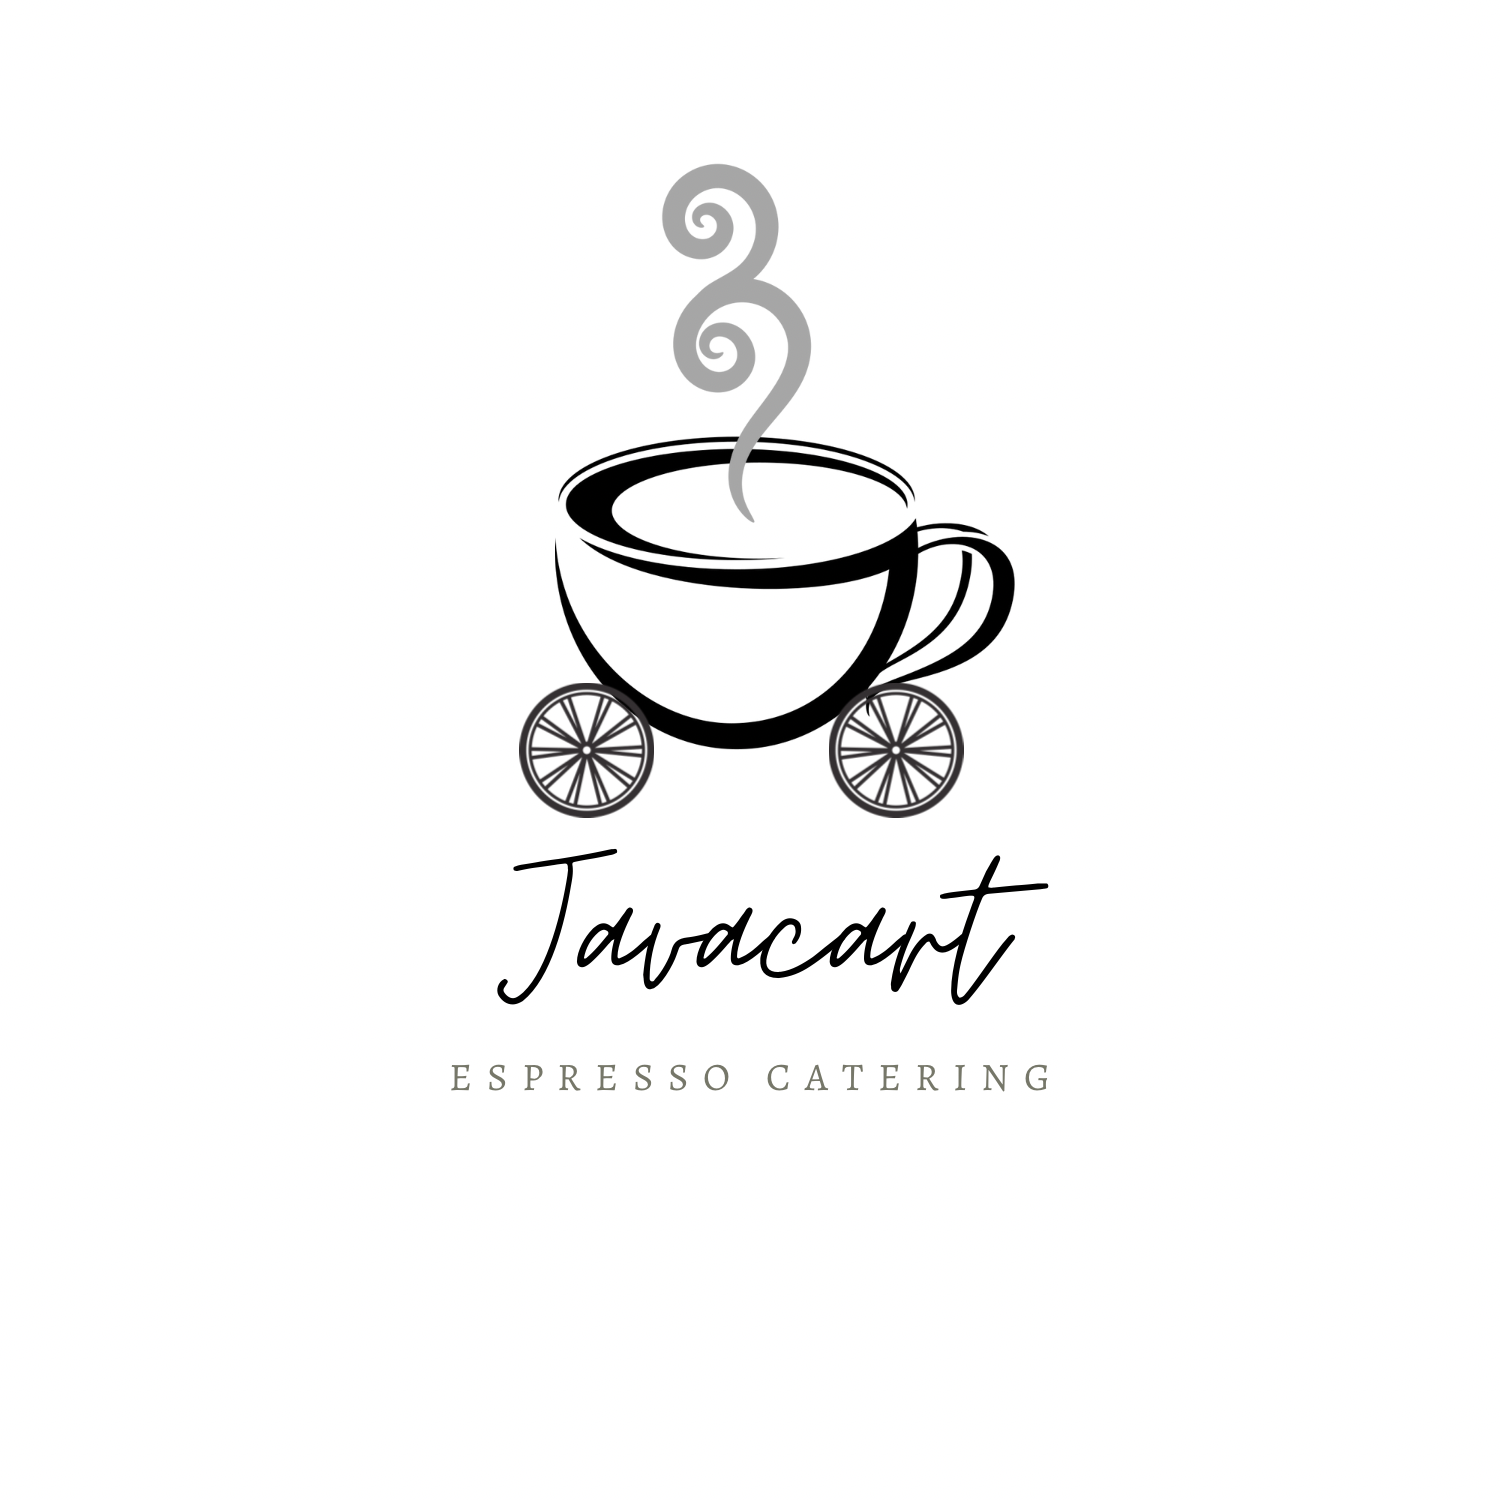 Everything Espresso on a Cart - Javacart Catering